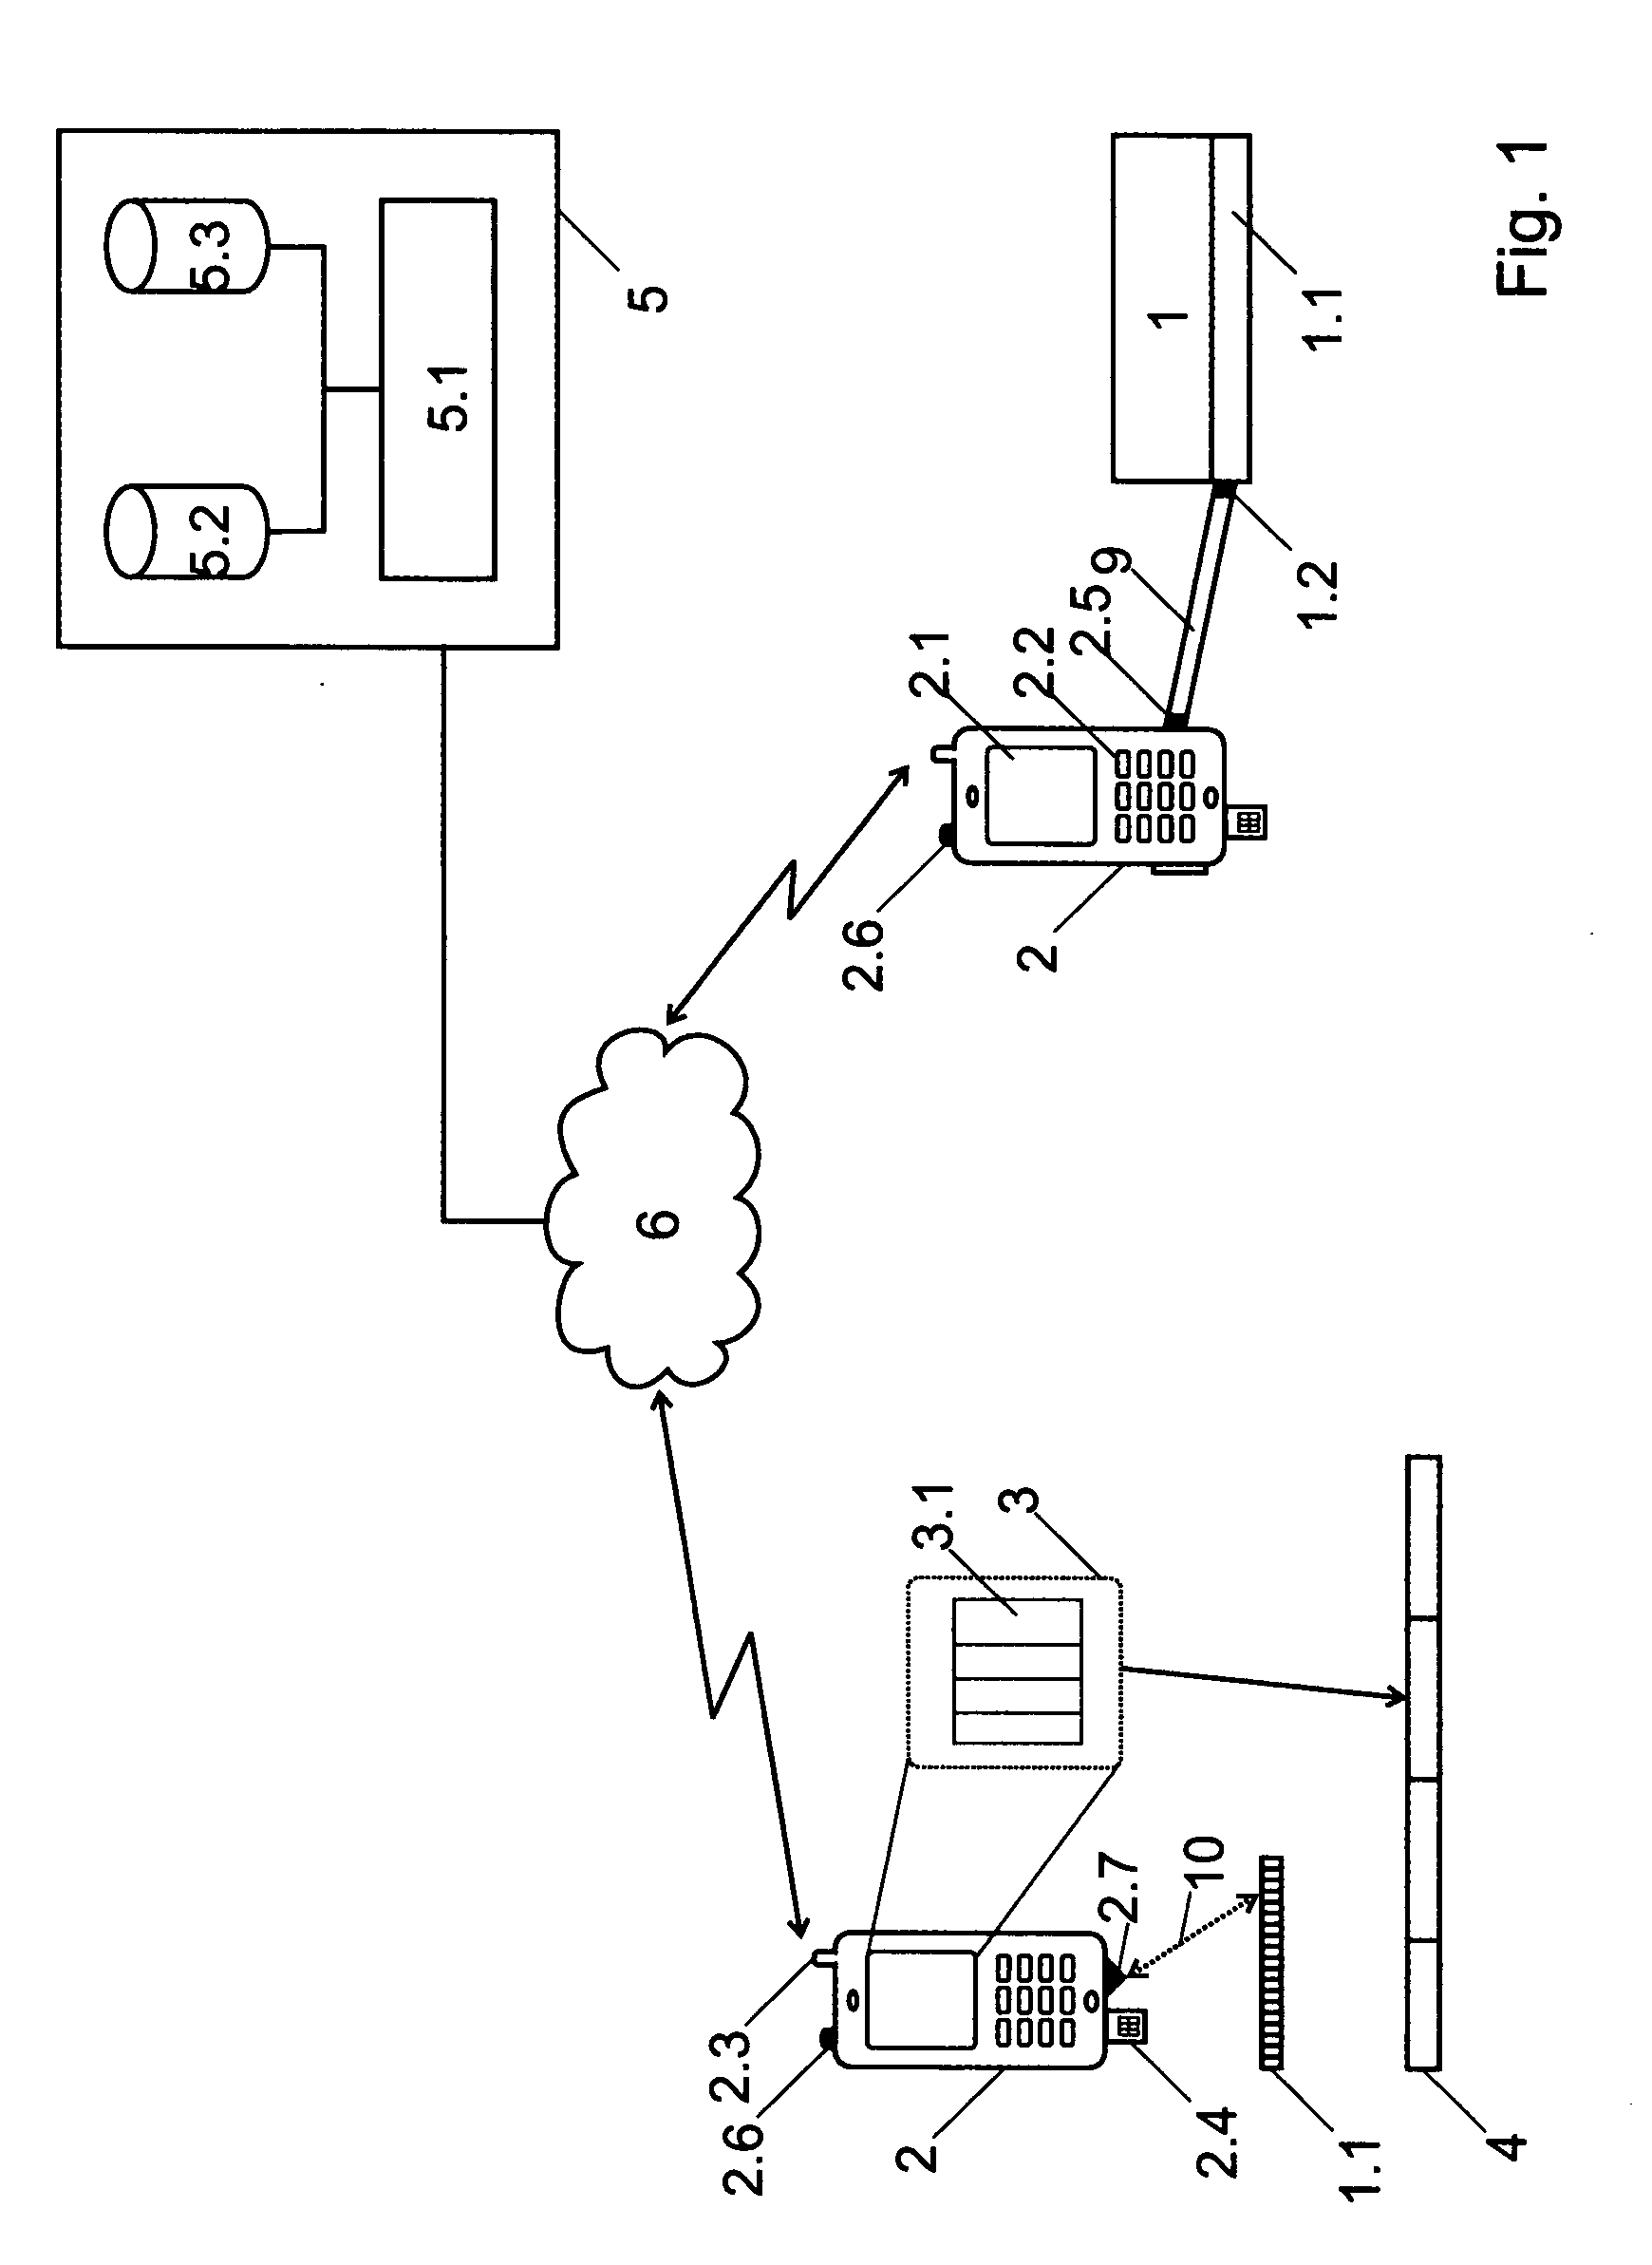 Method for directing a user of a mobile device from a current location to a product